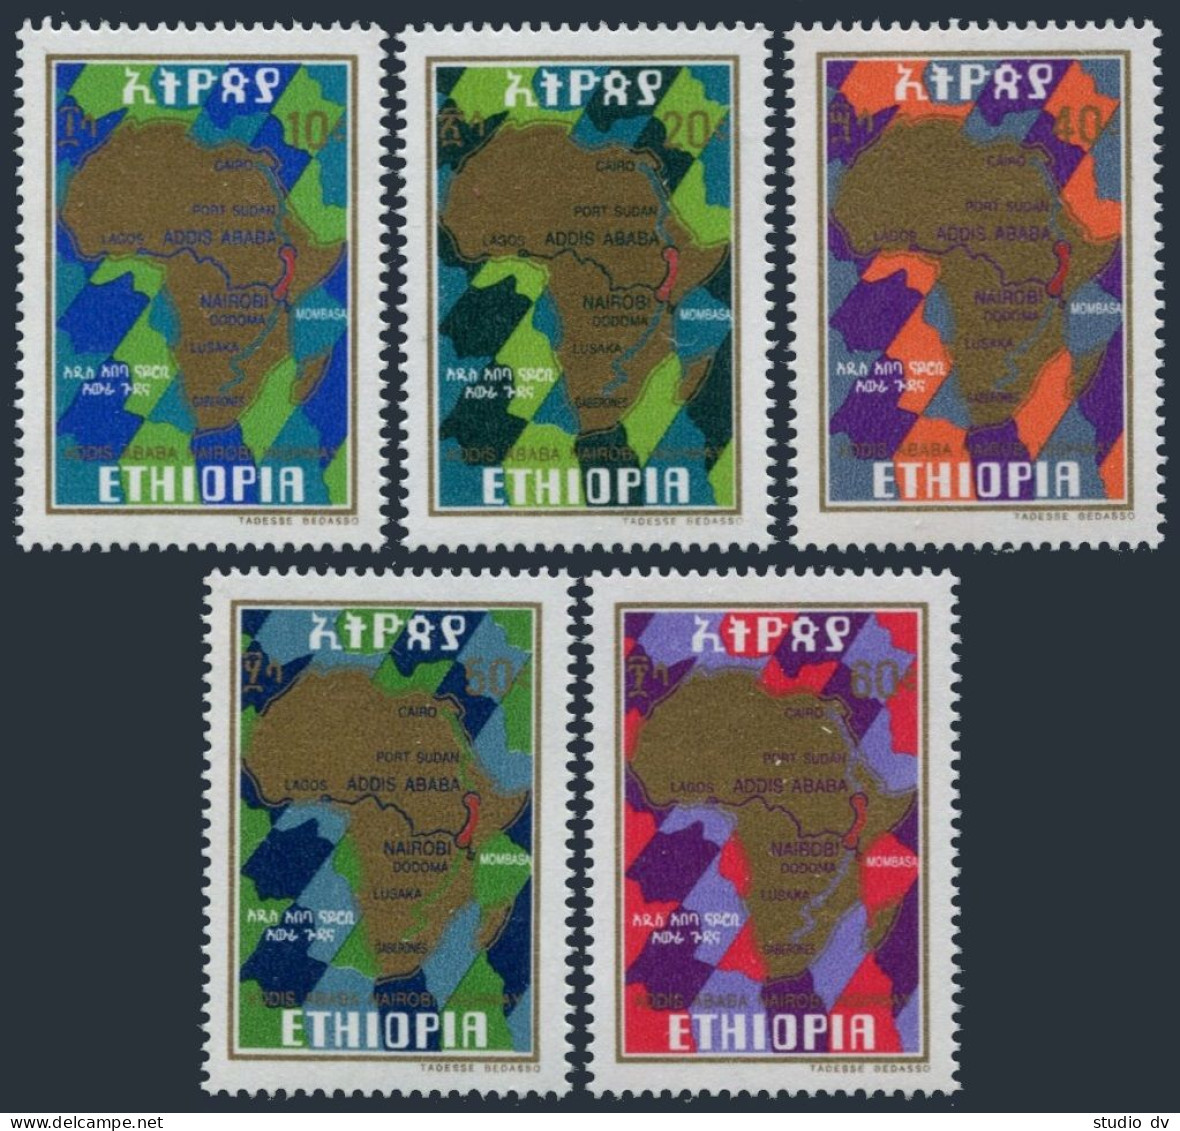 Ethiopia 827-831,MNH.Michel 913-917. Map Of Africa,Trans-East Highway,1977. - Ethiopie